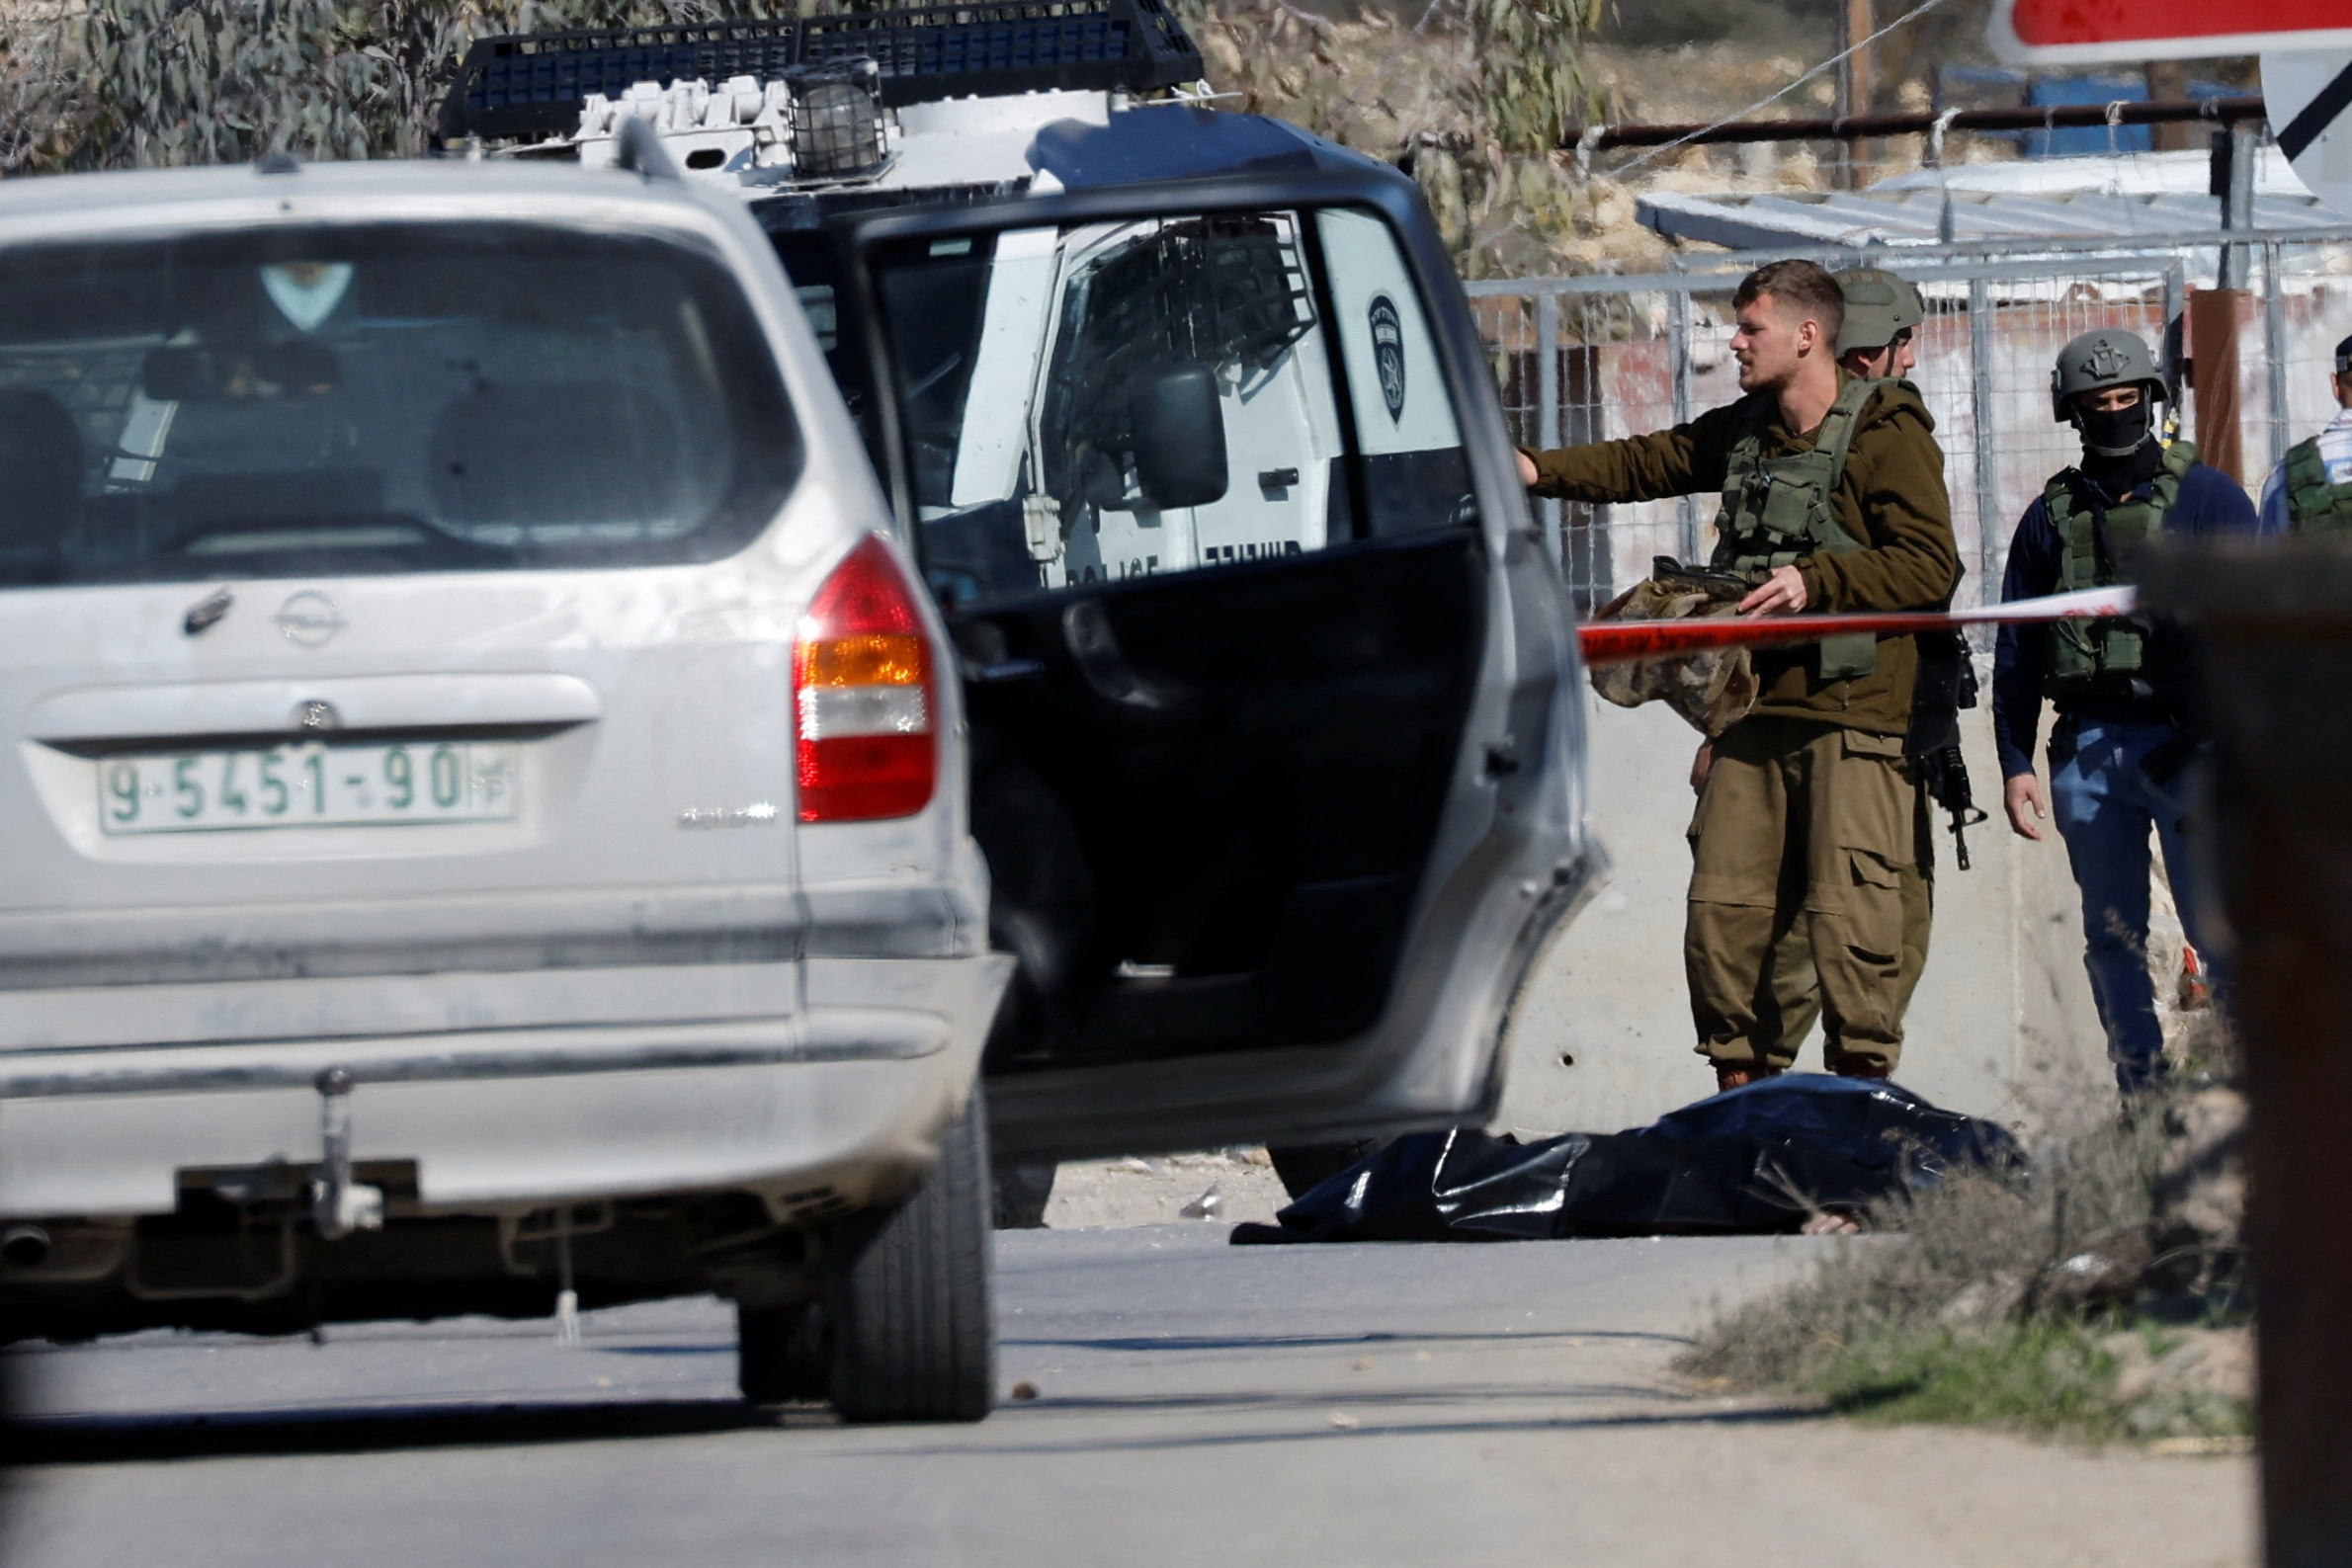 Israeli troops stand guard at the scene of the security incident near Hebron